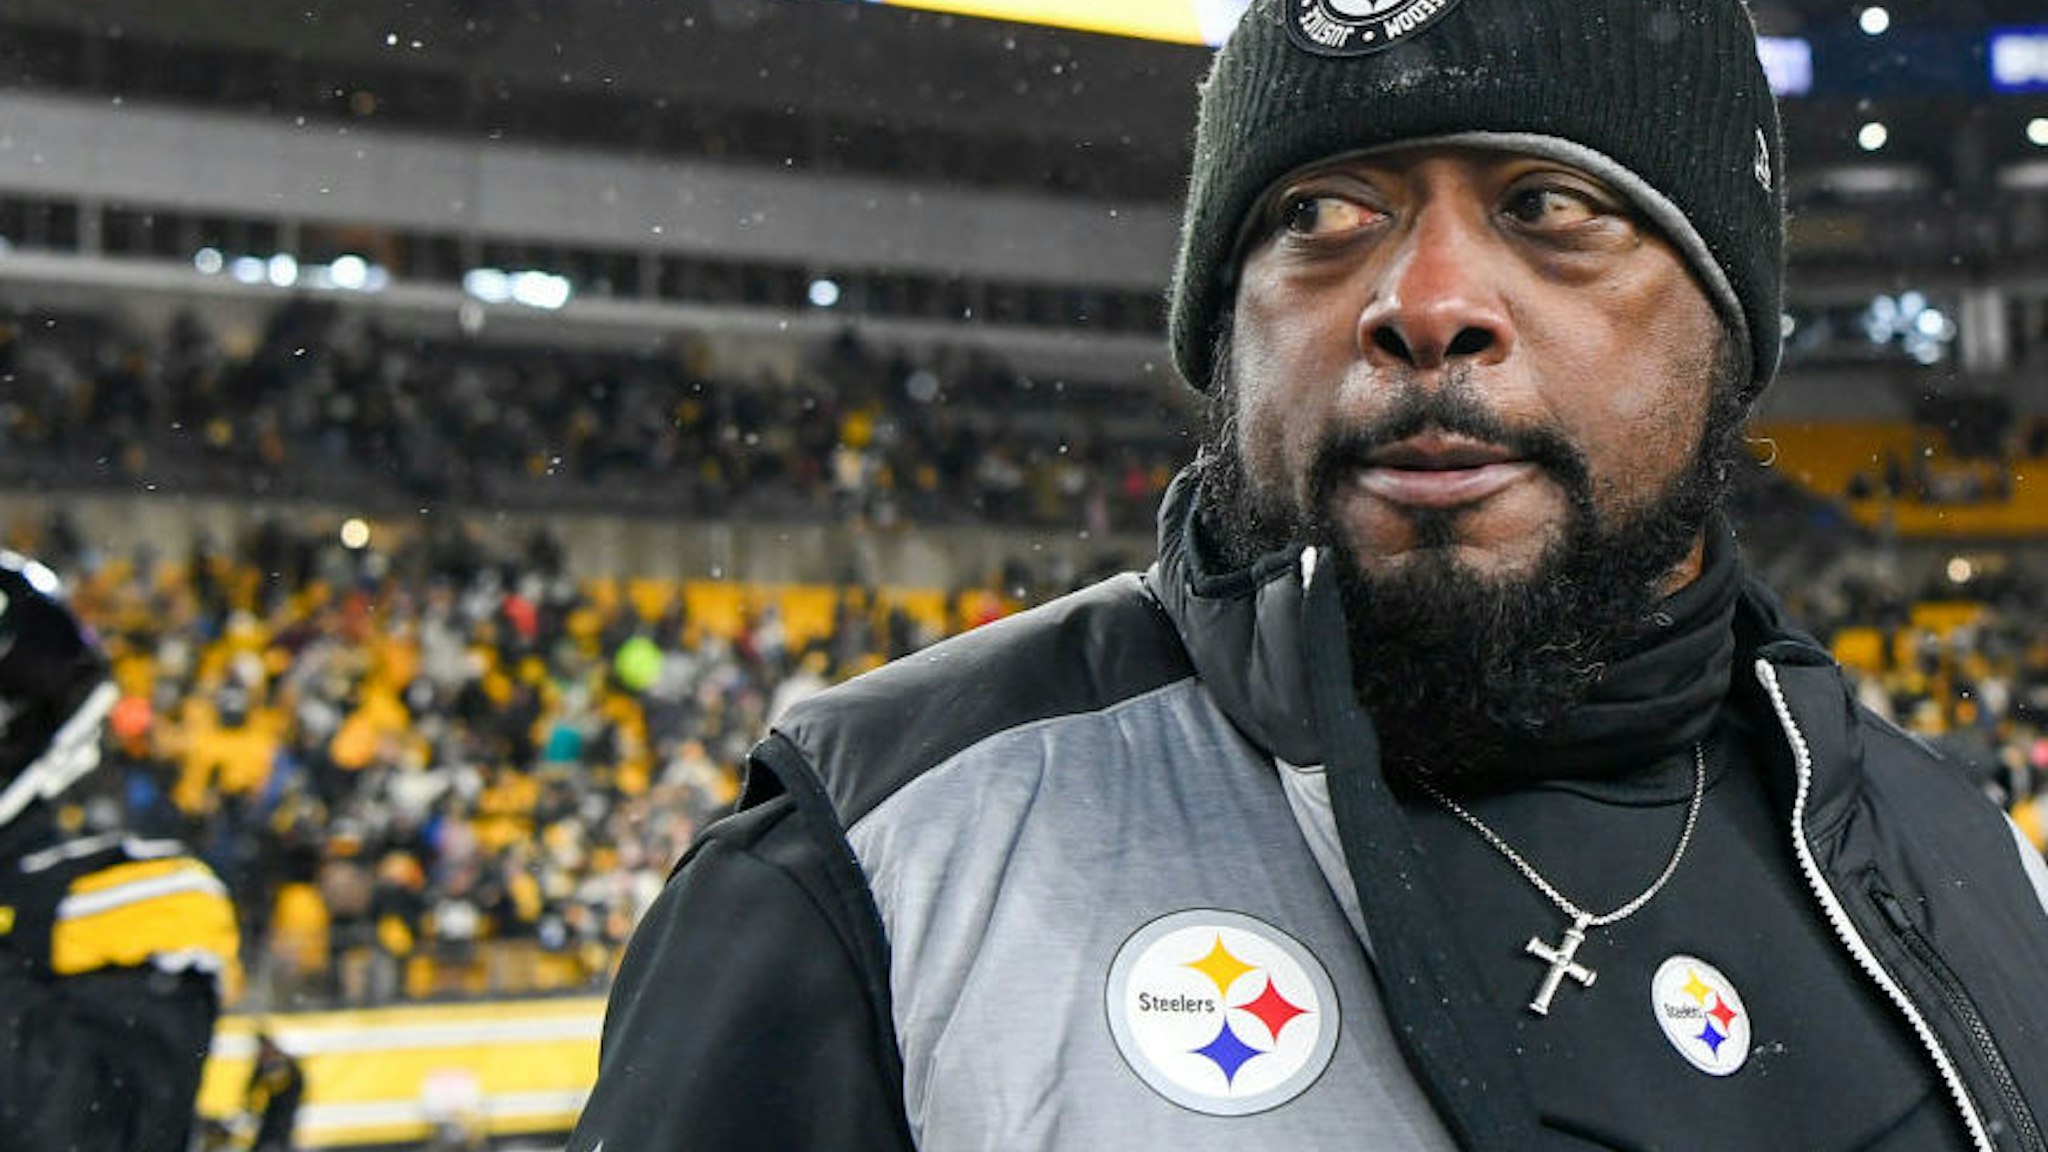 Pittsburgh Steelers head coach Mike Tomlin on the field after defeating the Las Vegas Raiders at Acrisure Stadium on December 24, 2022 in Pittsburgh, Pennsylvania.